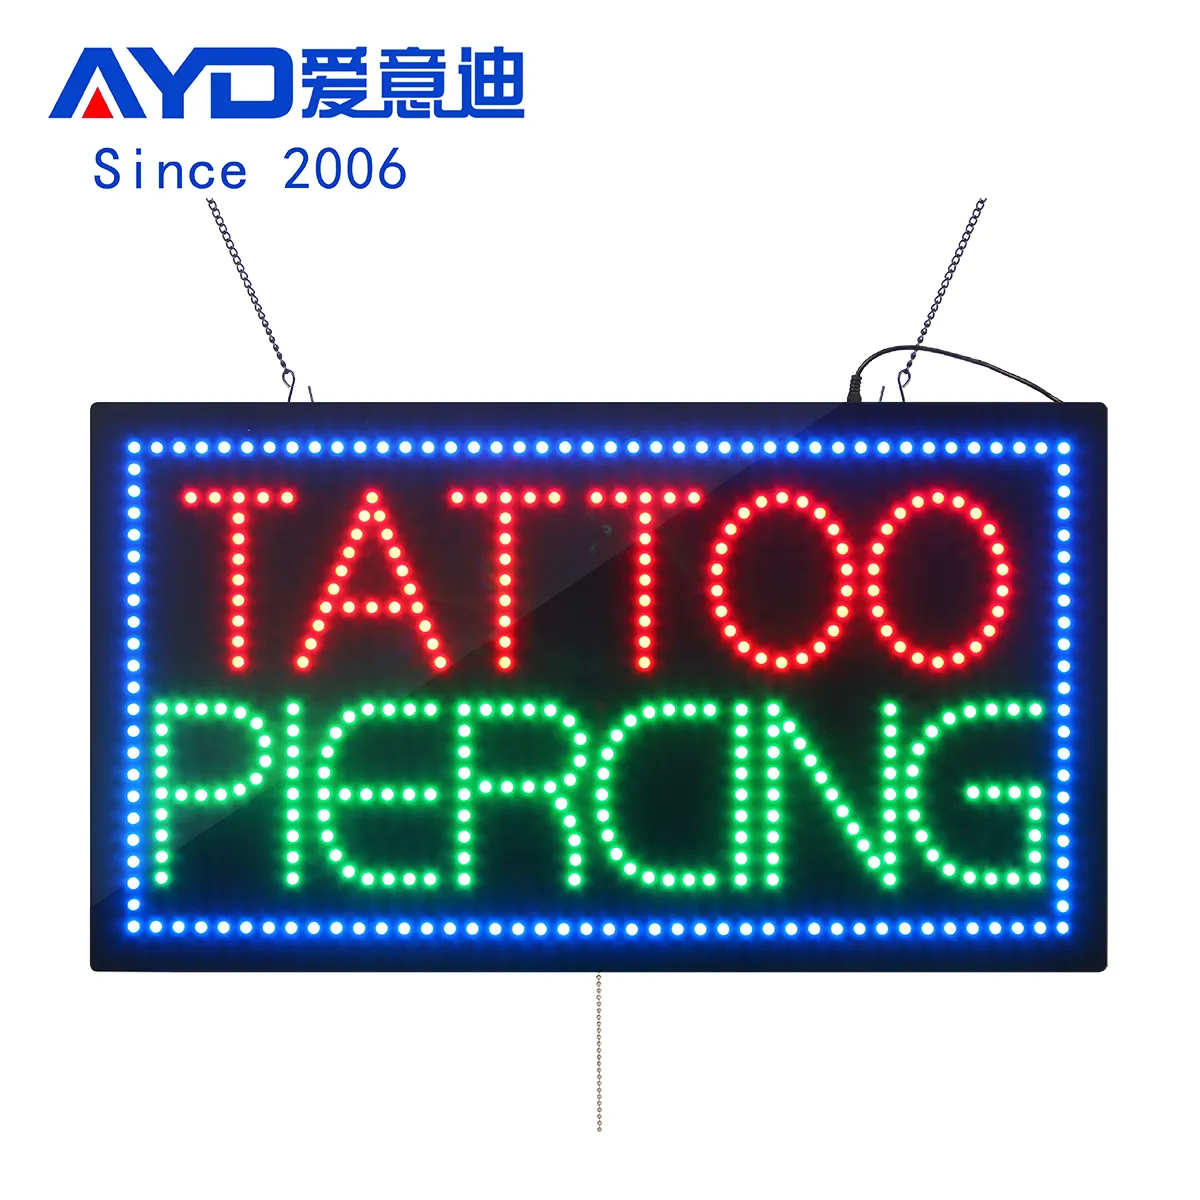 17*31 Inch High Bright Display Led Open TATTOO PIERCINE Sign Indoor Flashing Signs